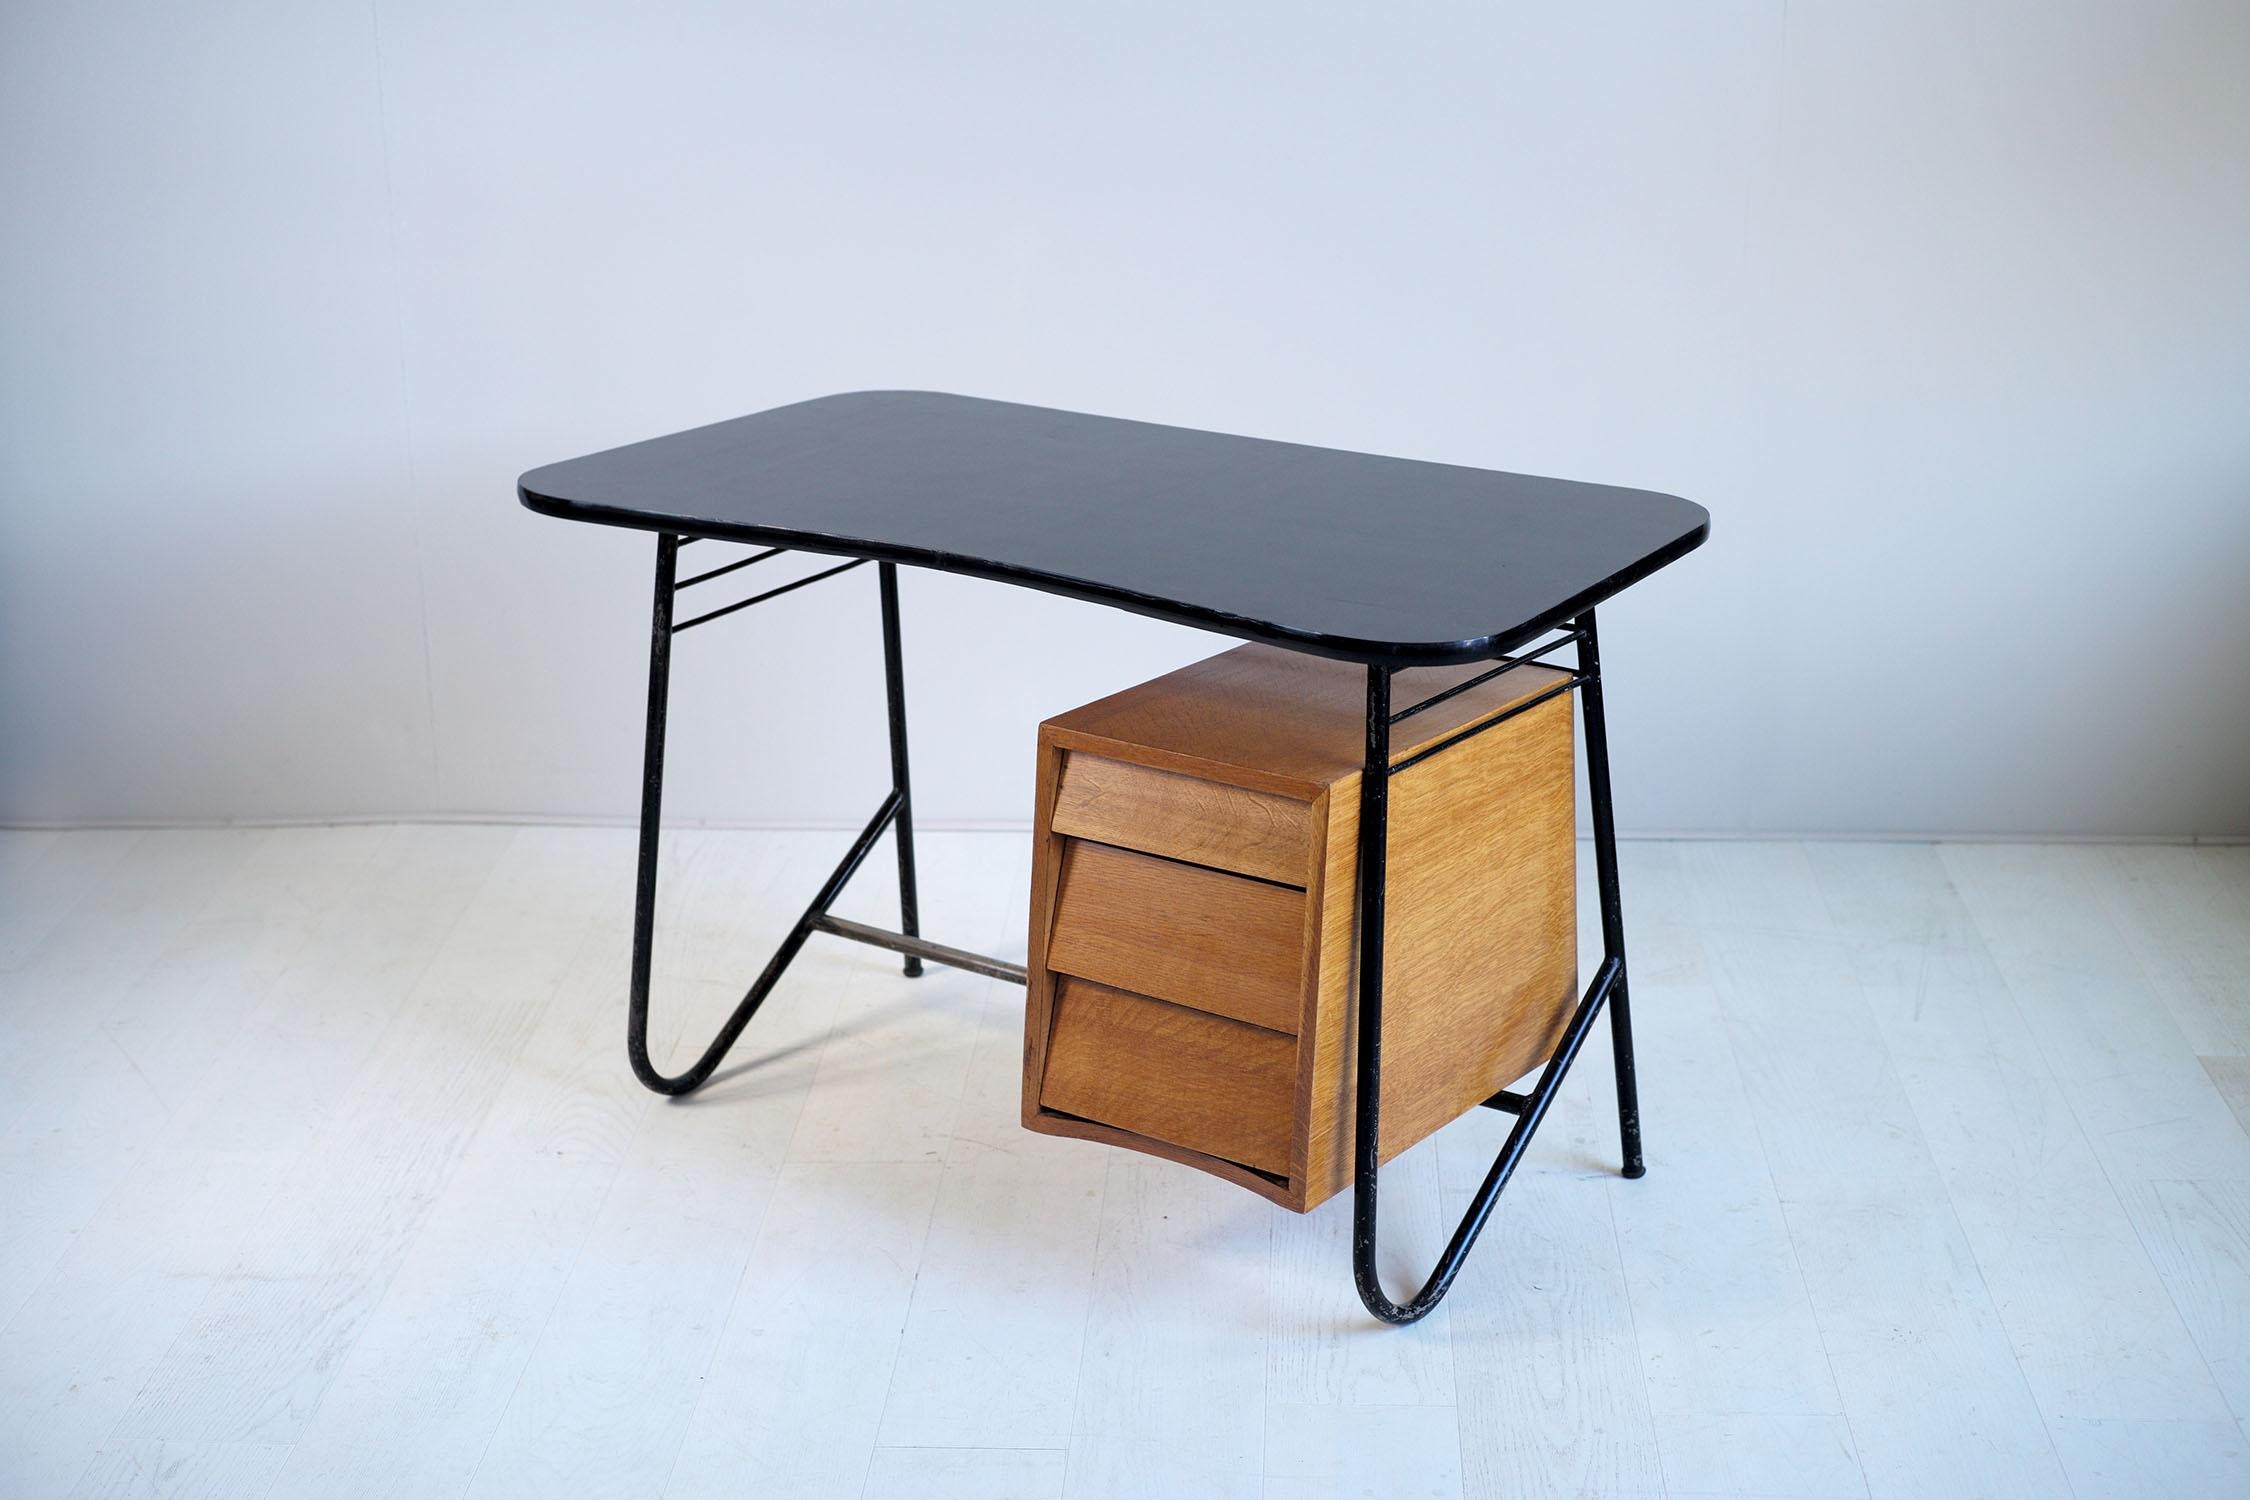 Black lacquered tubular metal free-form desk, three drawers oak cabinet and black formica top. The base is highlighted by a row of three slings, the kidney shaped tray and cutaway drawers give this creation of the French fifties a remarkable